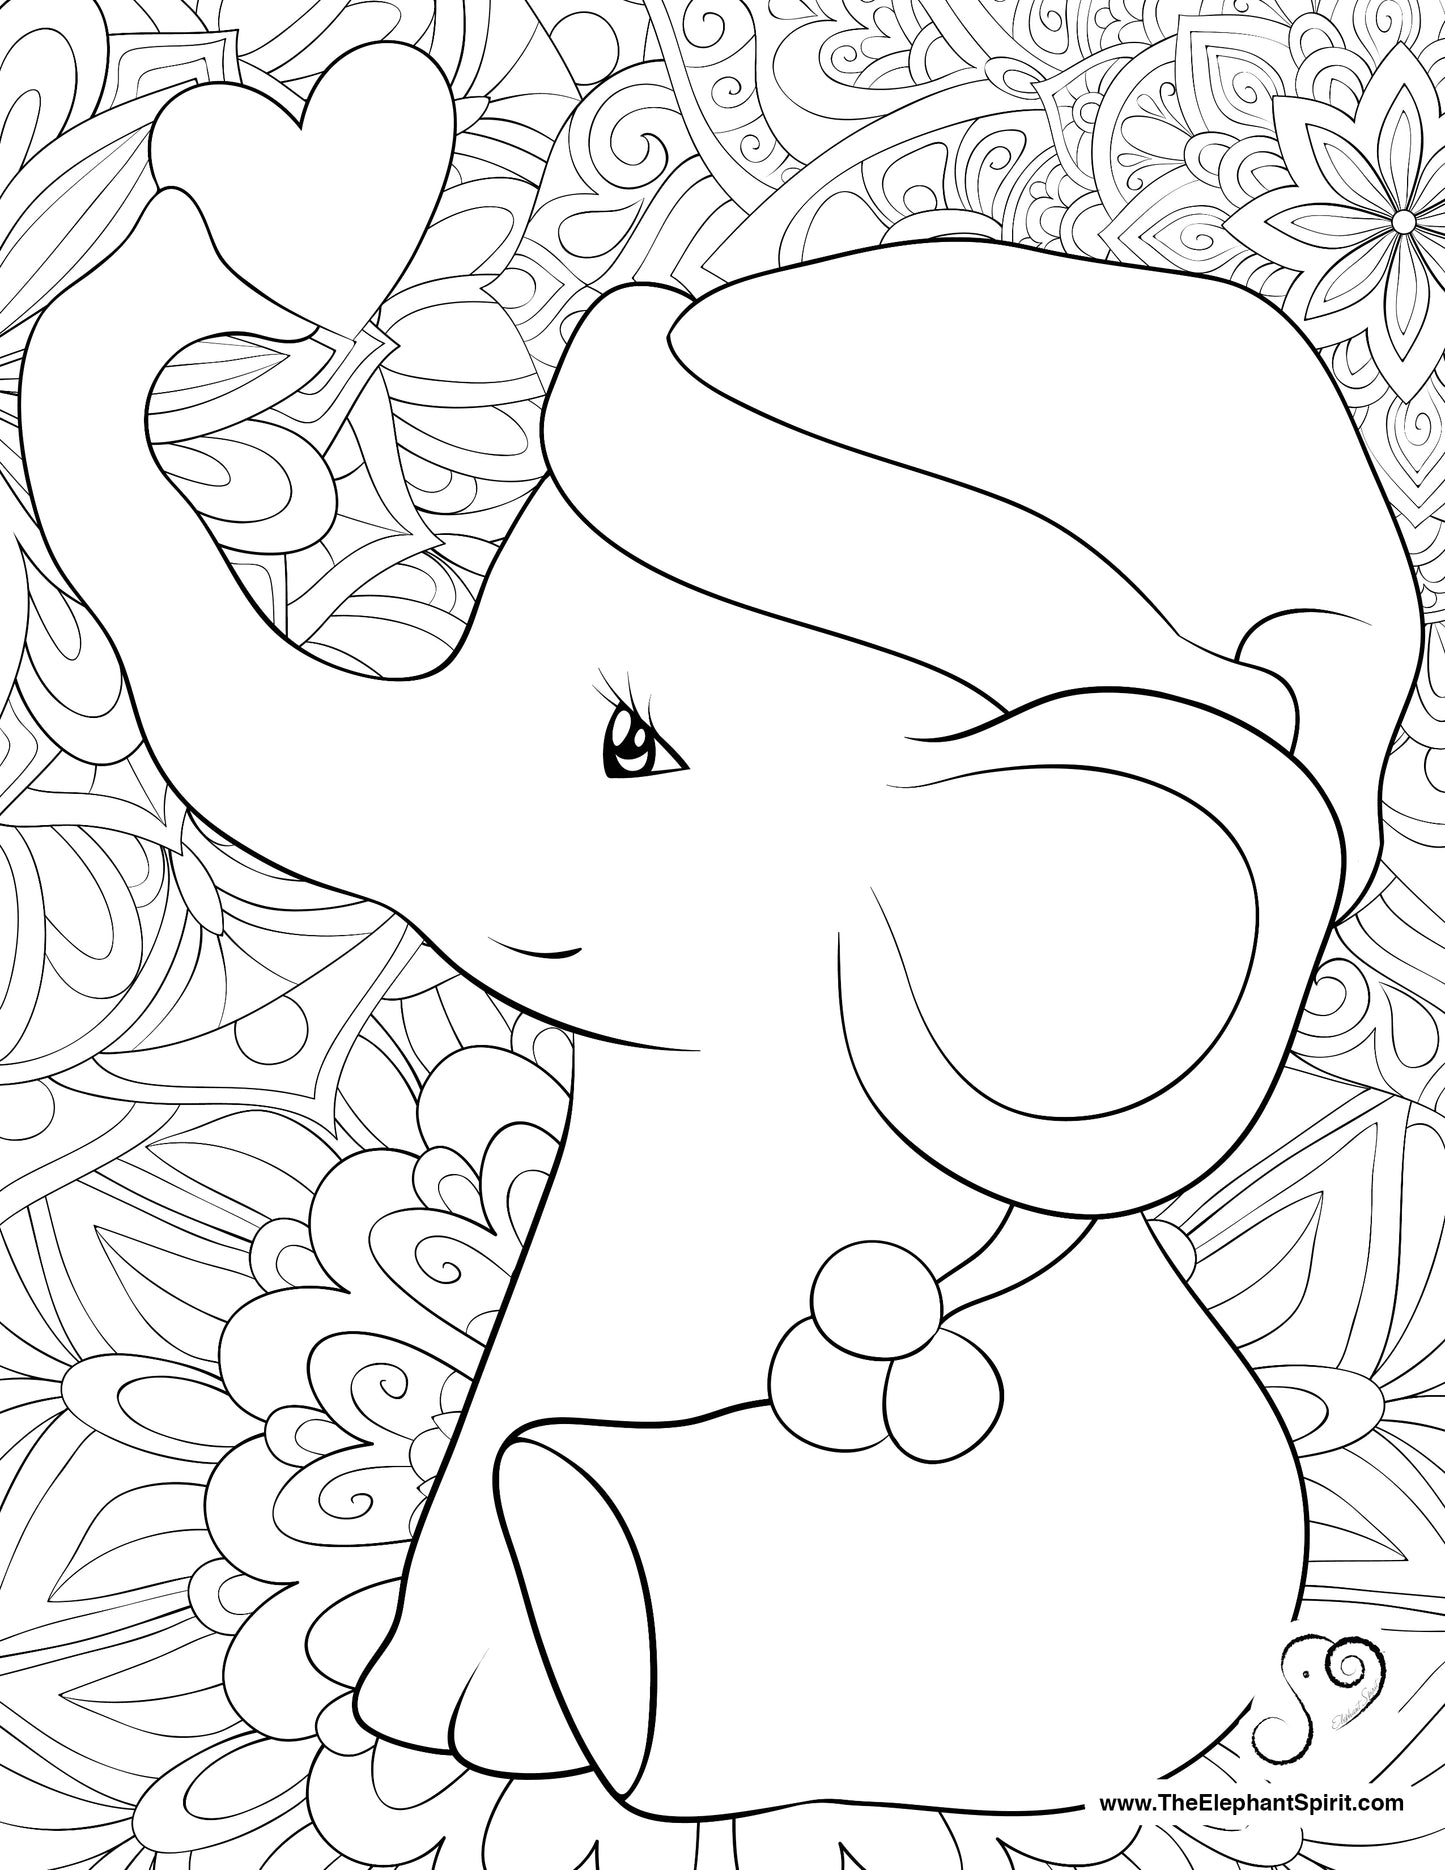 FREE Coloring Page 12-22